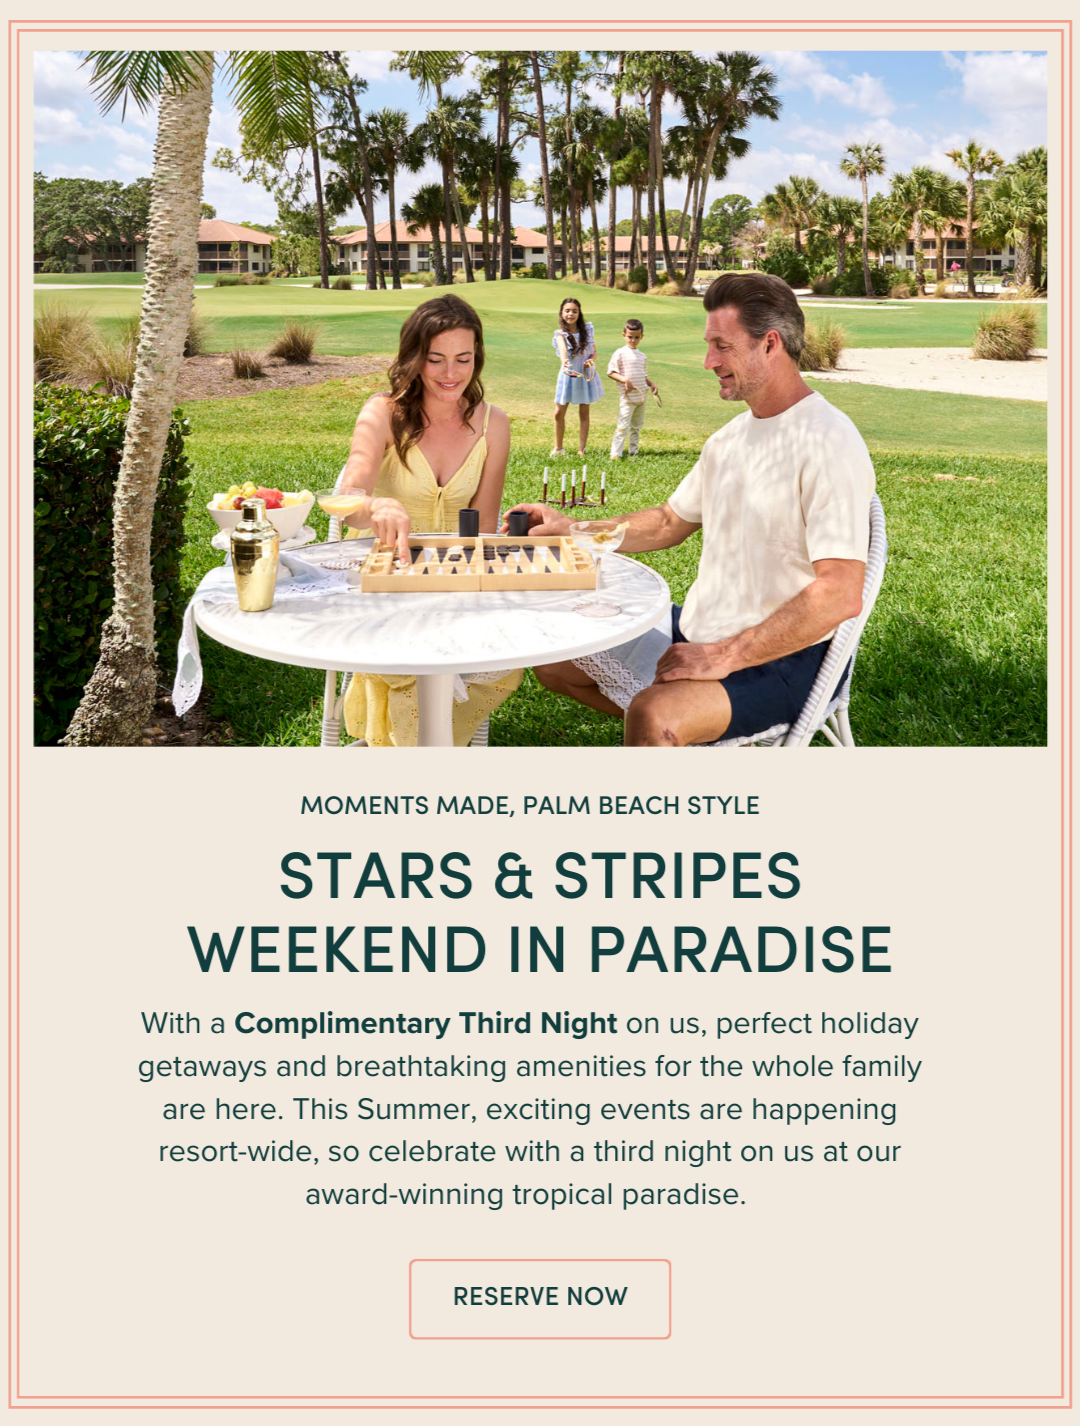 Stars & Stripes Weekend in Paradise: With a Complimentary Third Night on us, perfect holiday getaways and breathtaking amenities for the whole family are here. This Summer, exciting events are happening resort-wide, so celebrate with a third night on us at our award-winning tropical paradise. 